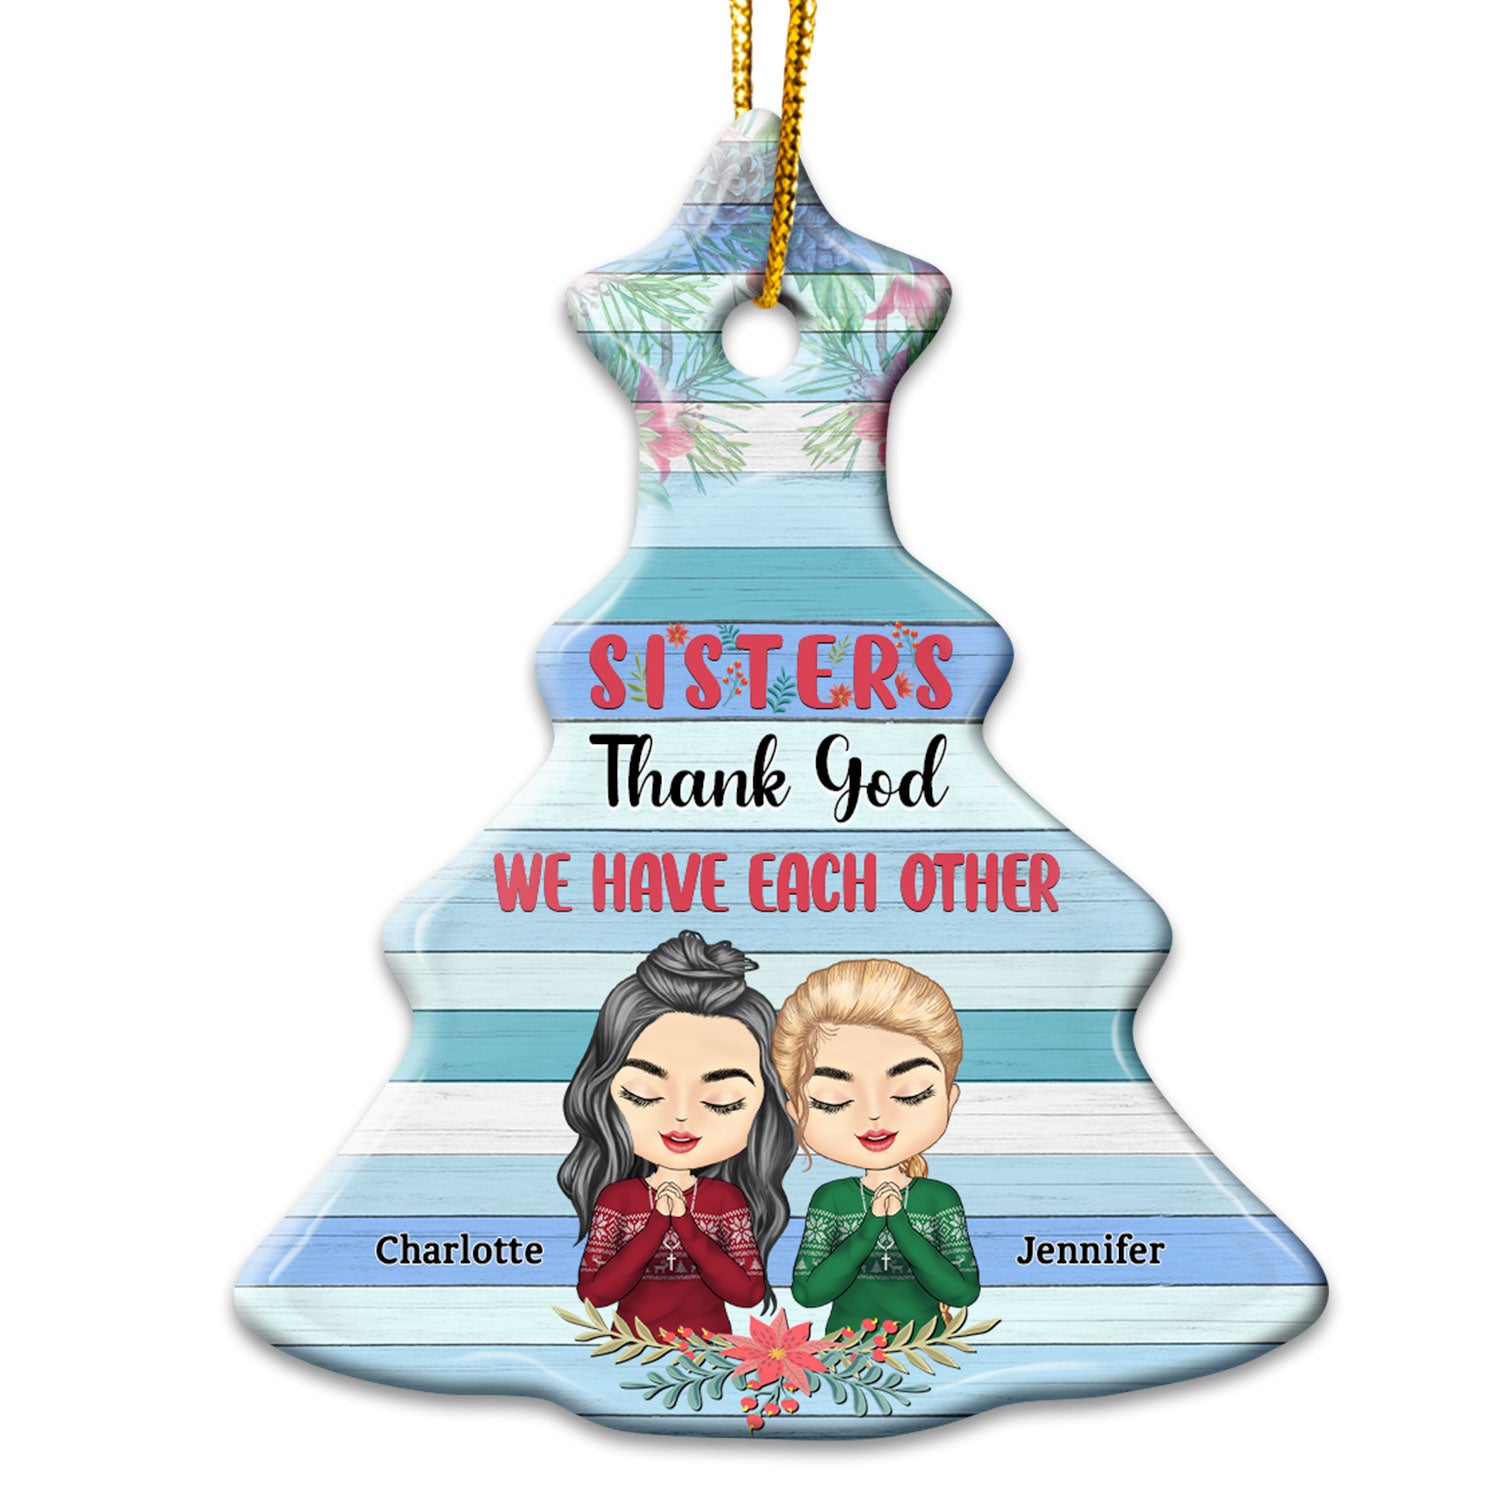 We Have Each Other - Christmas Gift For Sisters - Personalized Tree Ceramic Ornament